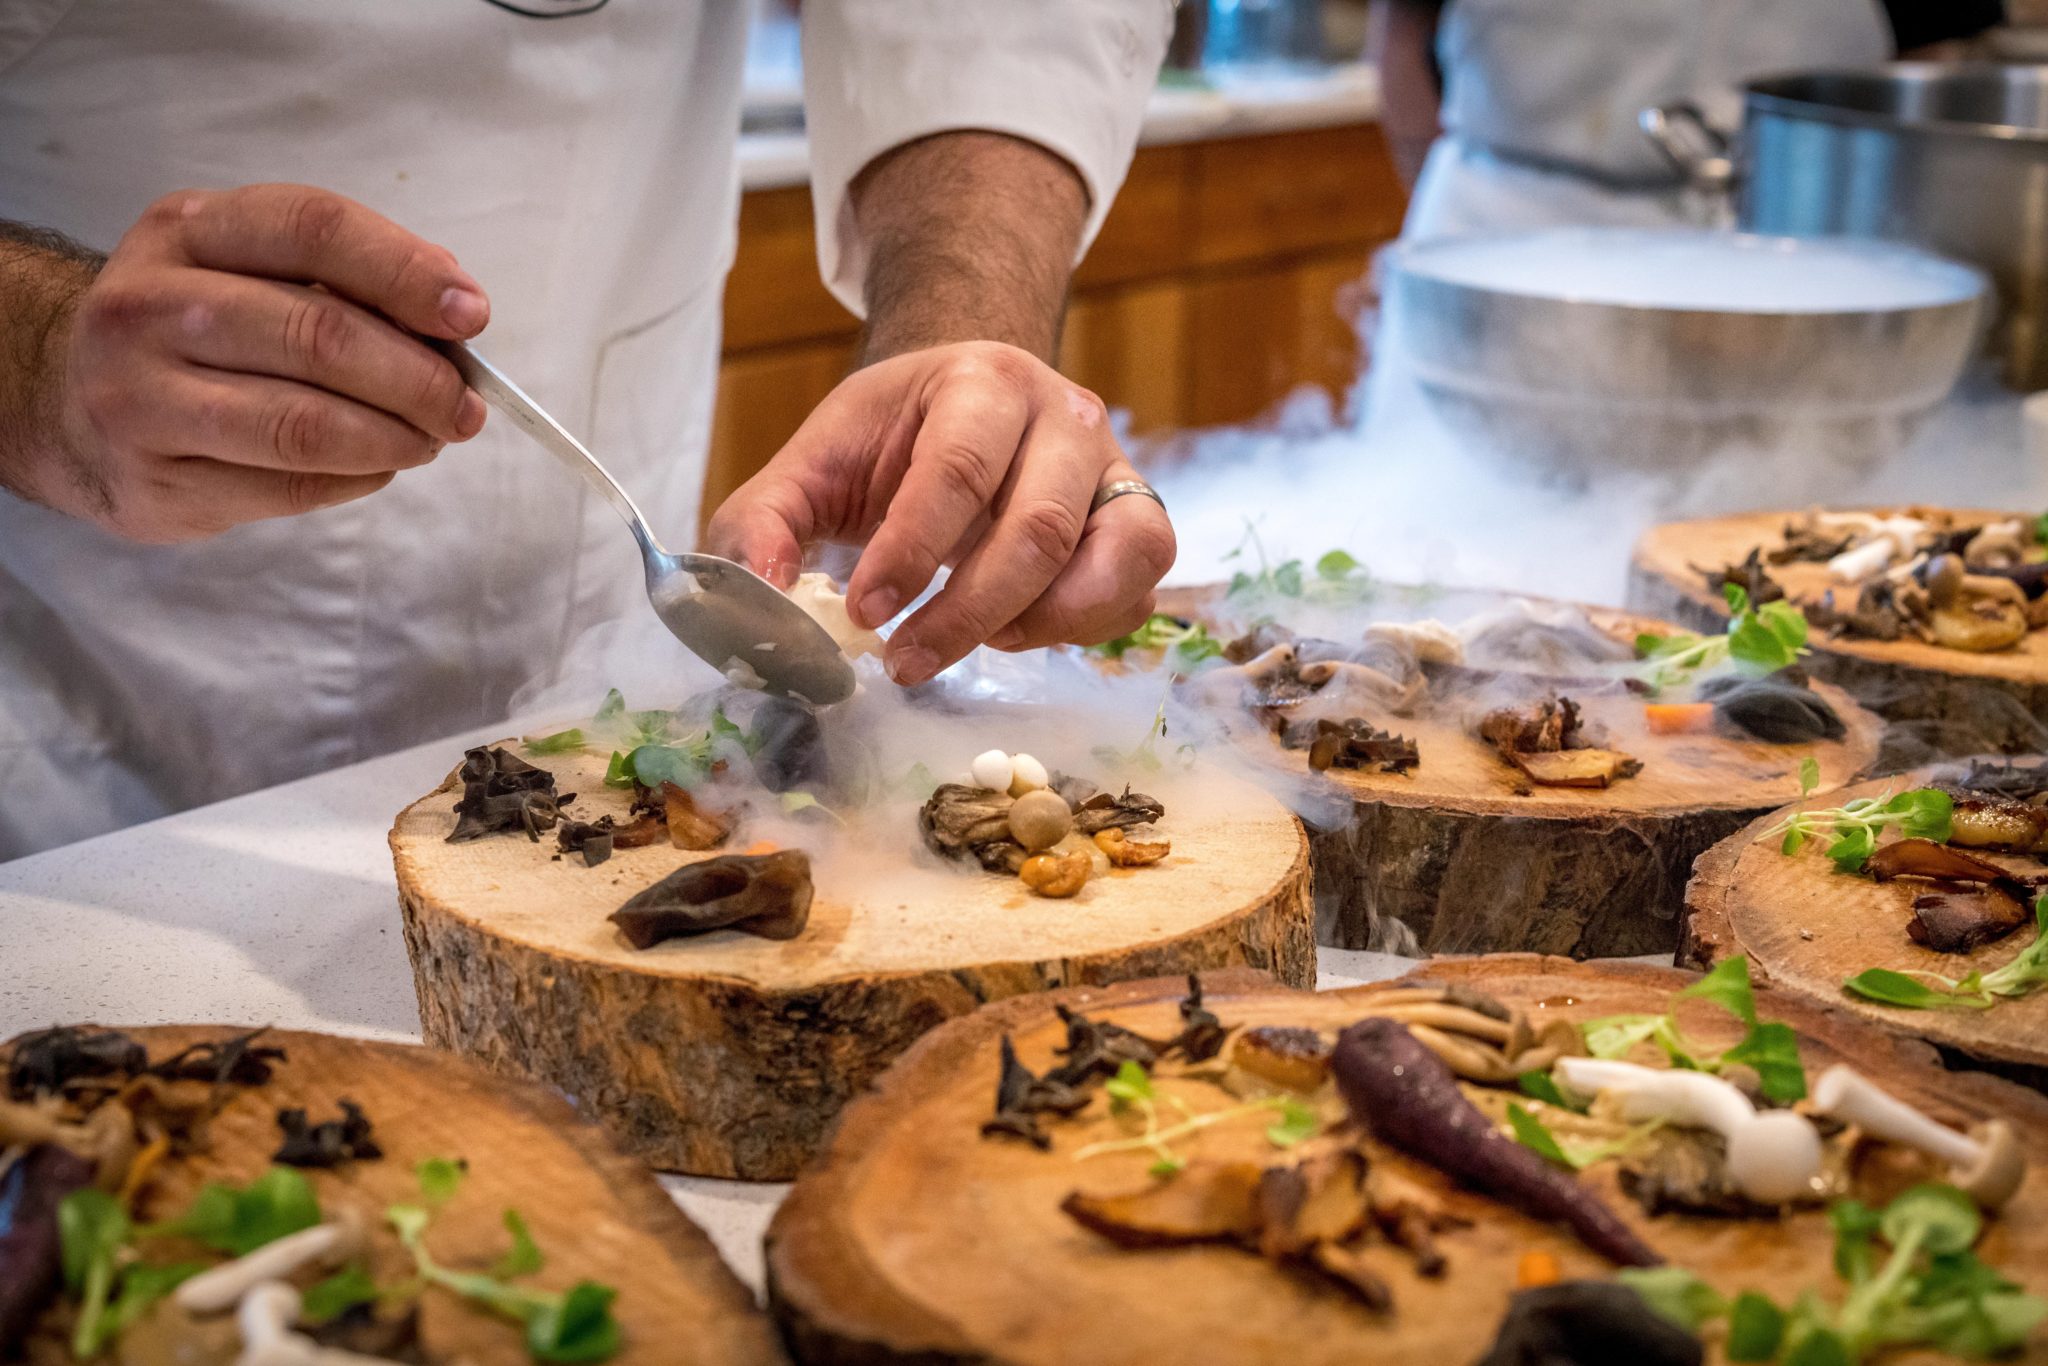 Chef meticulously garnishing mushroom dishes with fresh herbs on rustic wooden slabs amid a cloud of aromatic smoke in a professional kitchen.